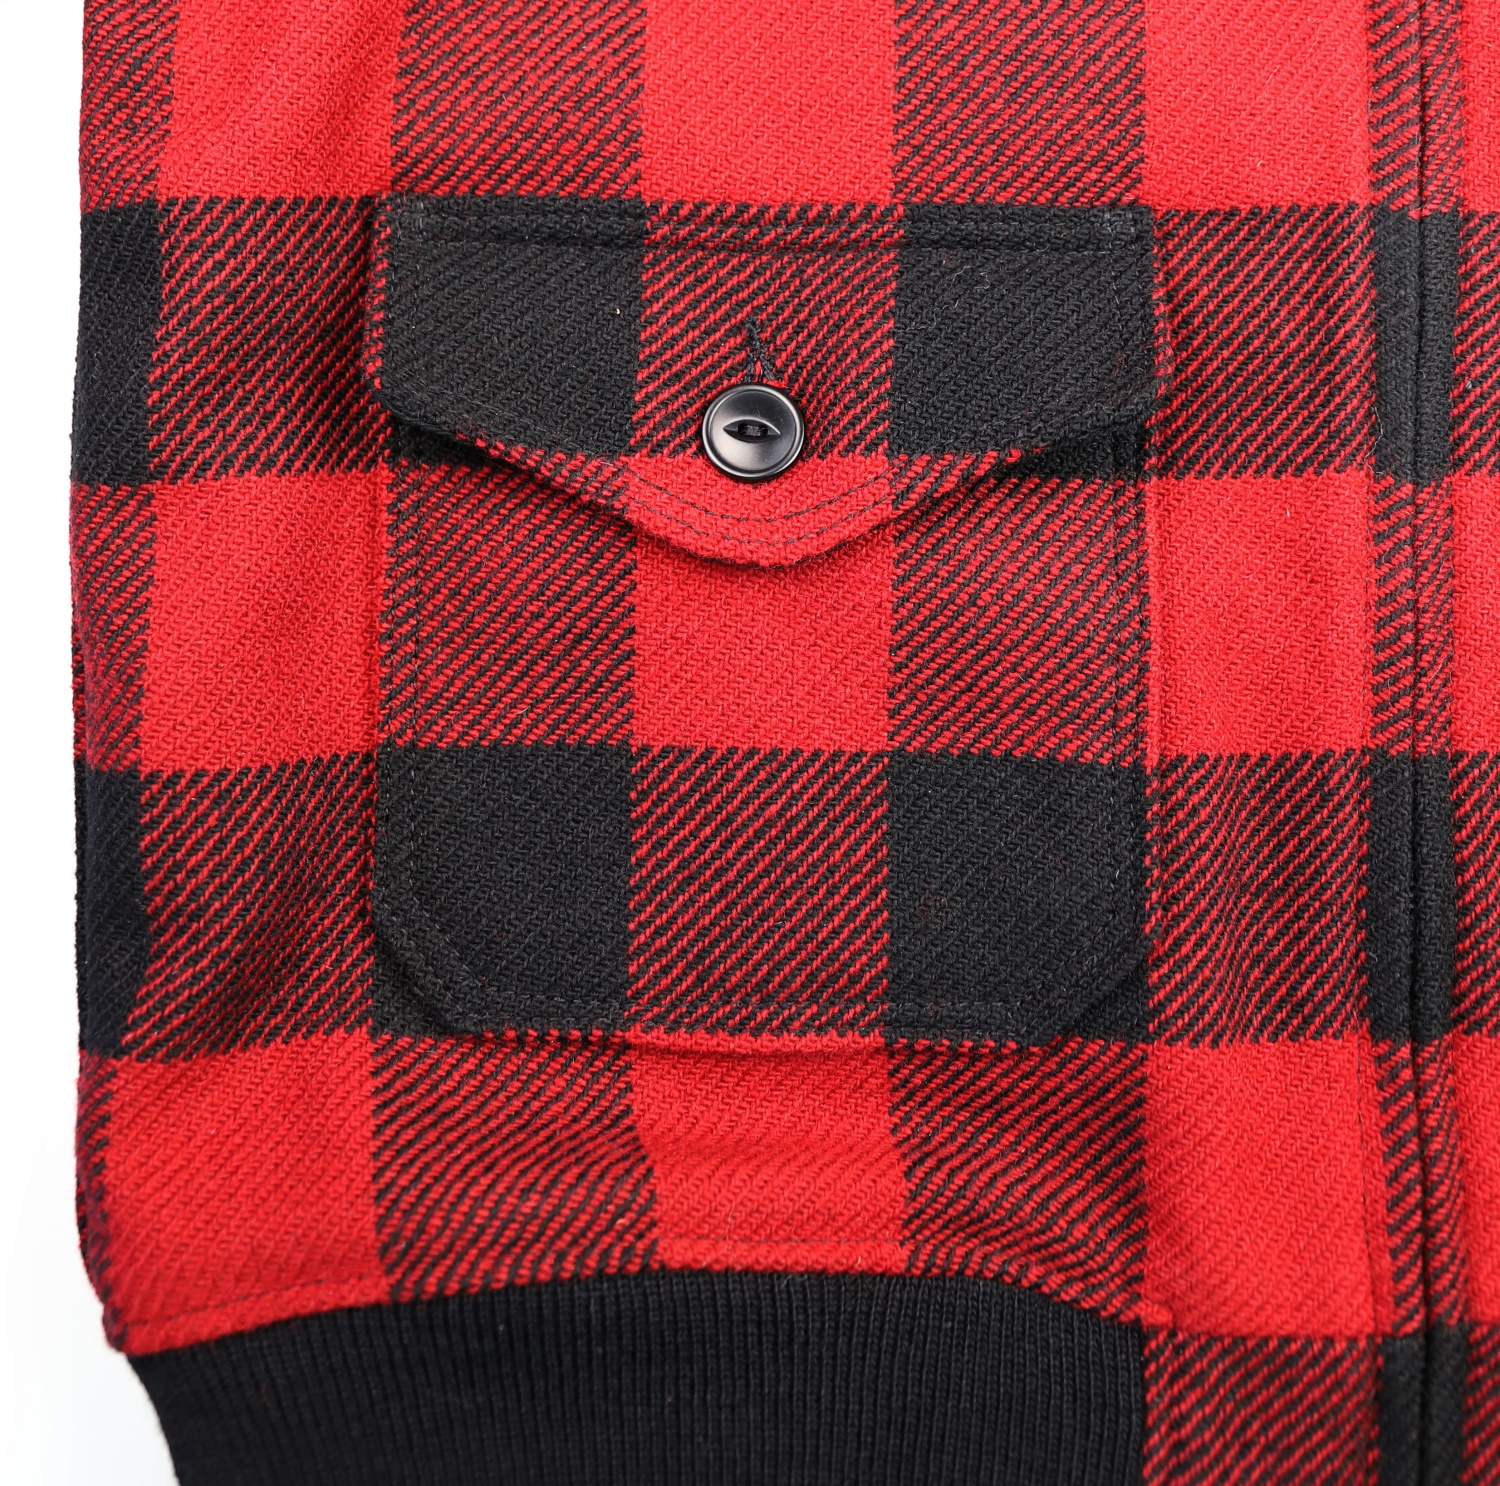 Aero Waterfront Red and Black WN4 patch pocket.jpg